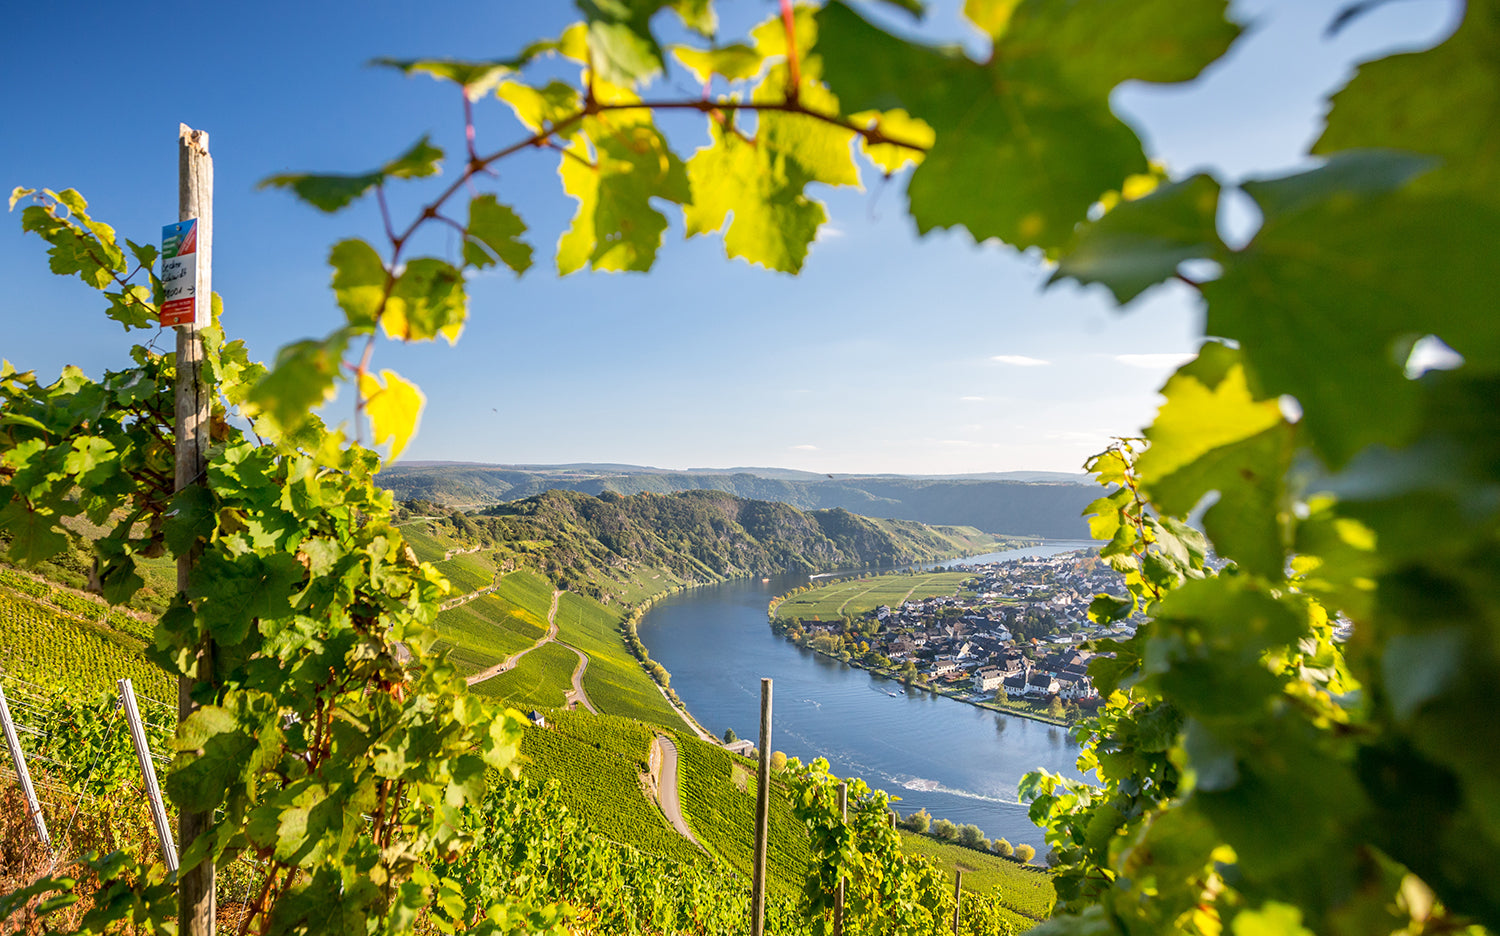 Vineyards in the Mosel, like Rheingau, are on steep south-facing slopes of the river, where they catch the maximum sunshine in this cool region.